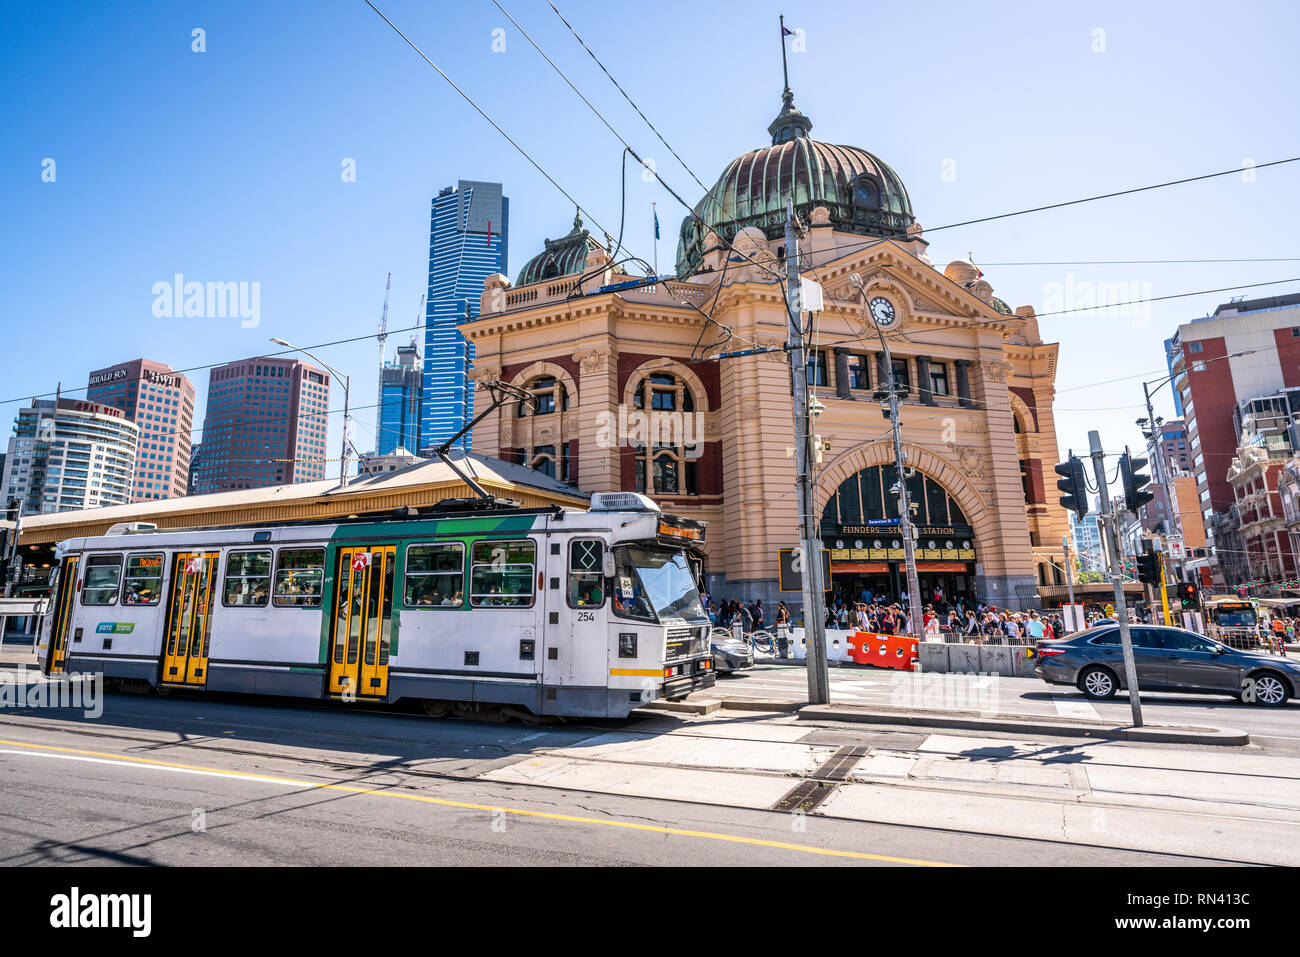 2nd January 2019, Melbourne Australia : Scenic view of Melbourne tram and Flinders street railway station building in Melbourne Victoria Australia Stock Photo